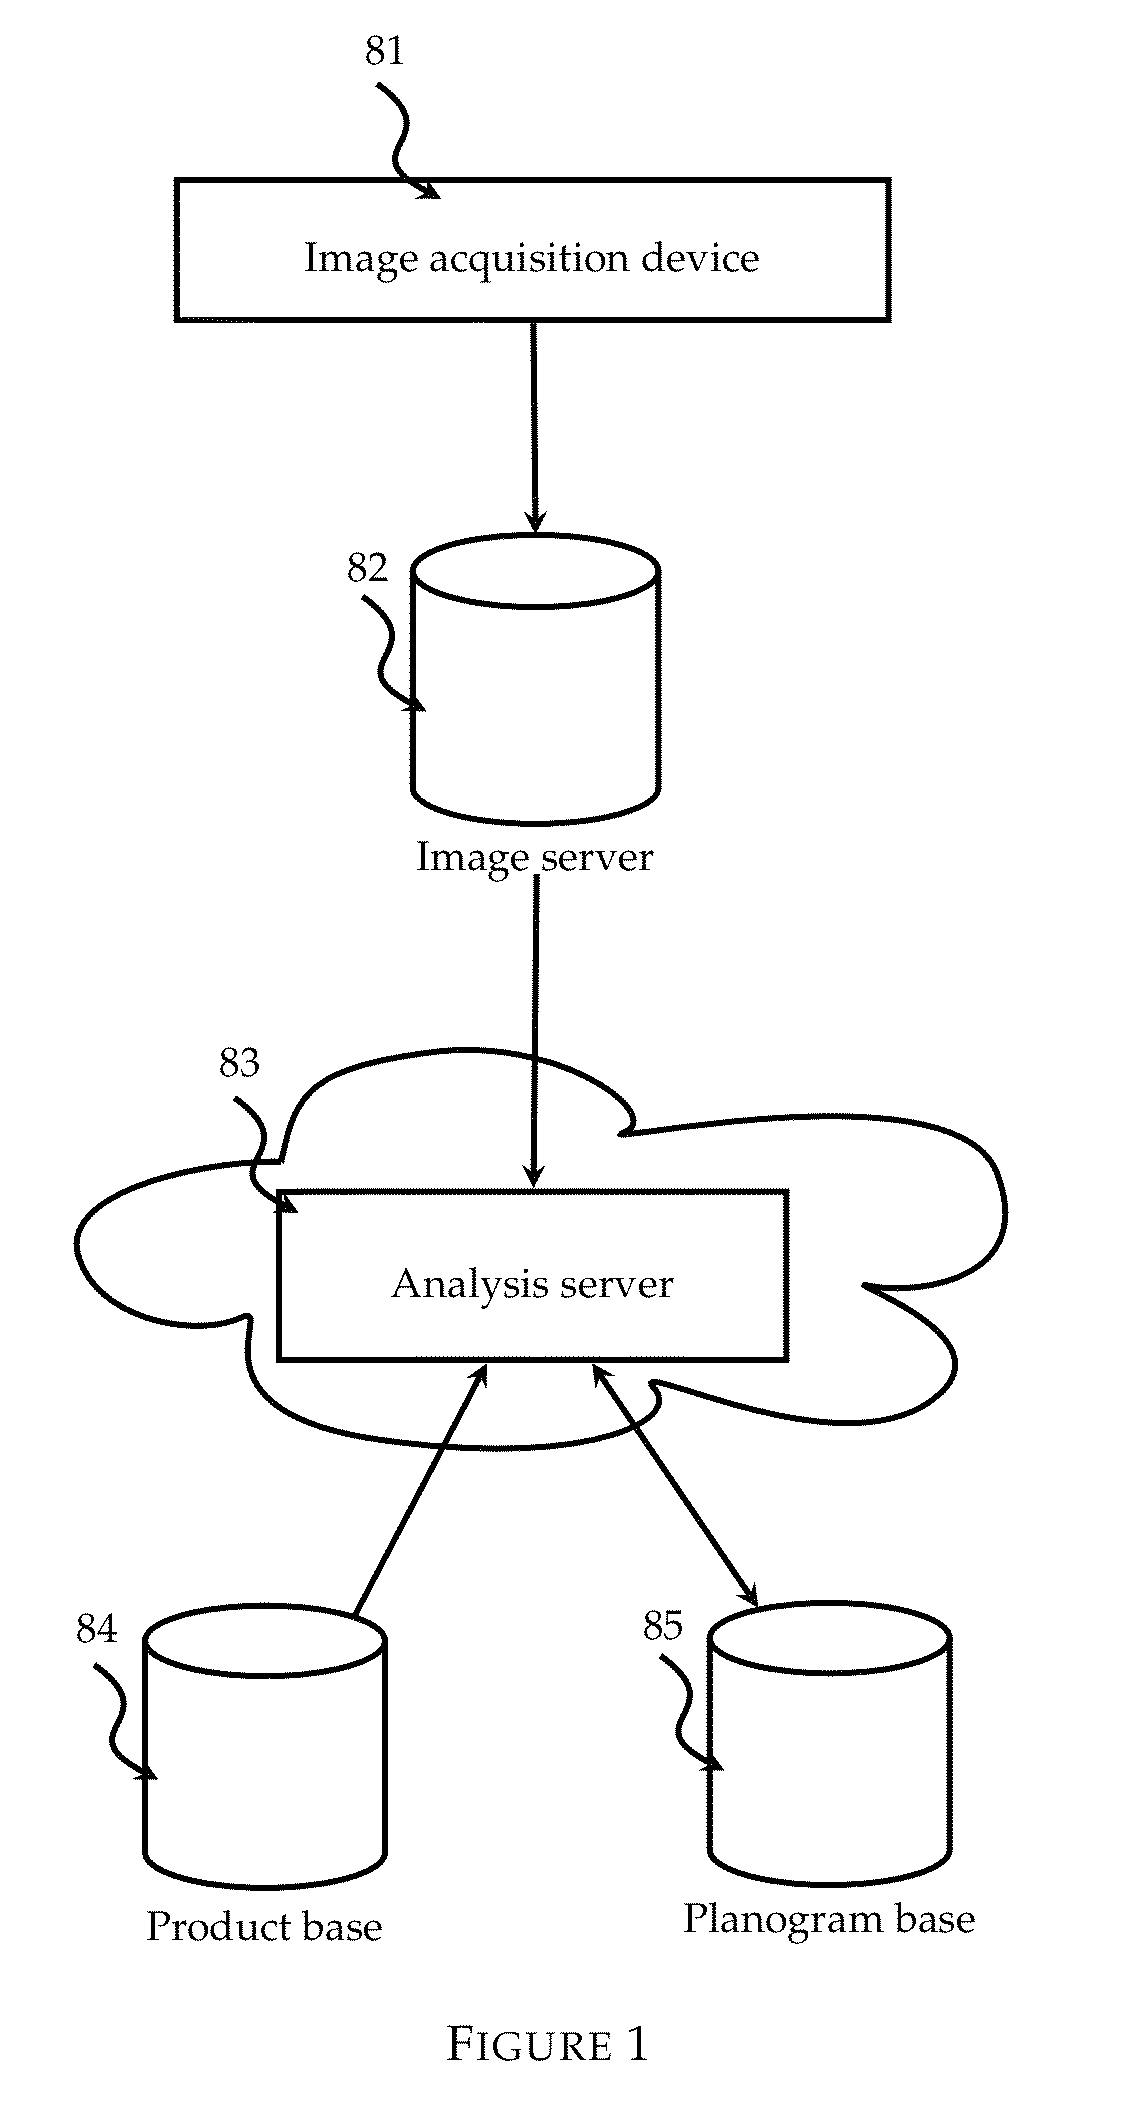 Method for the automated extraction of a planogram from images of shelving